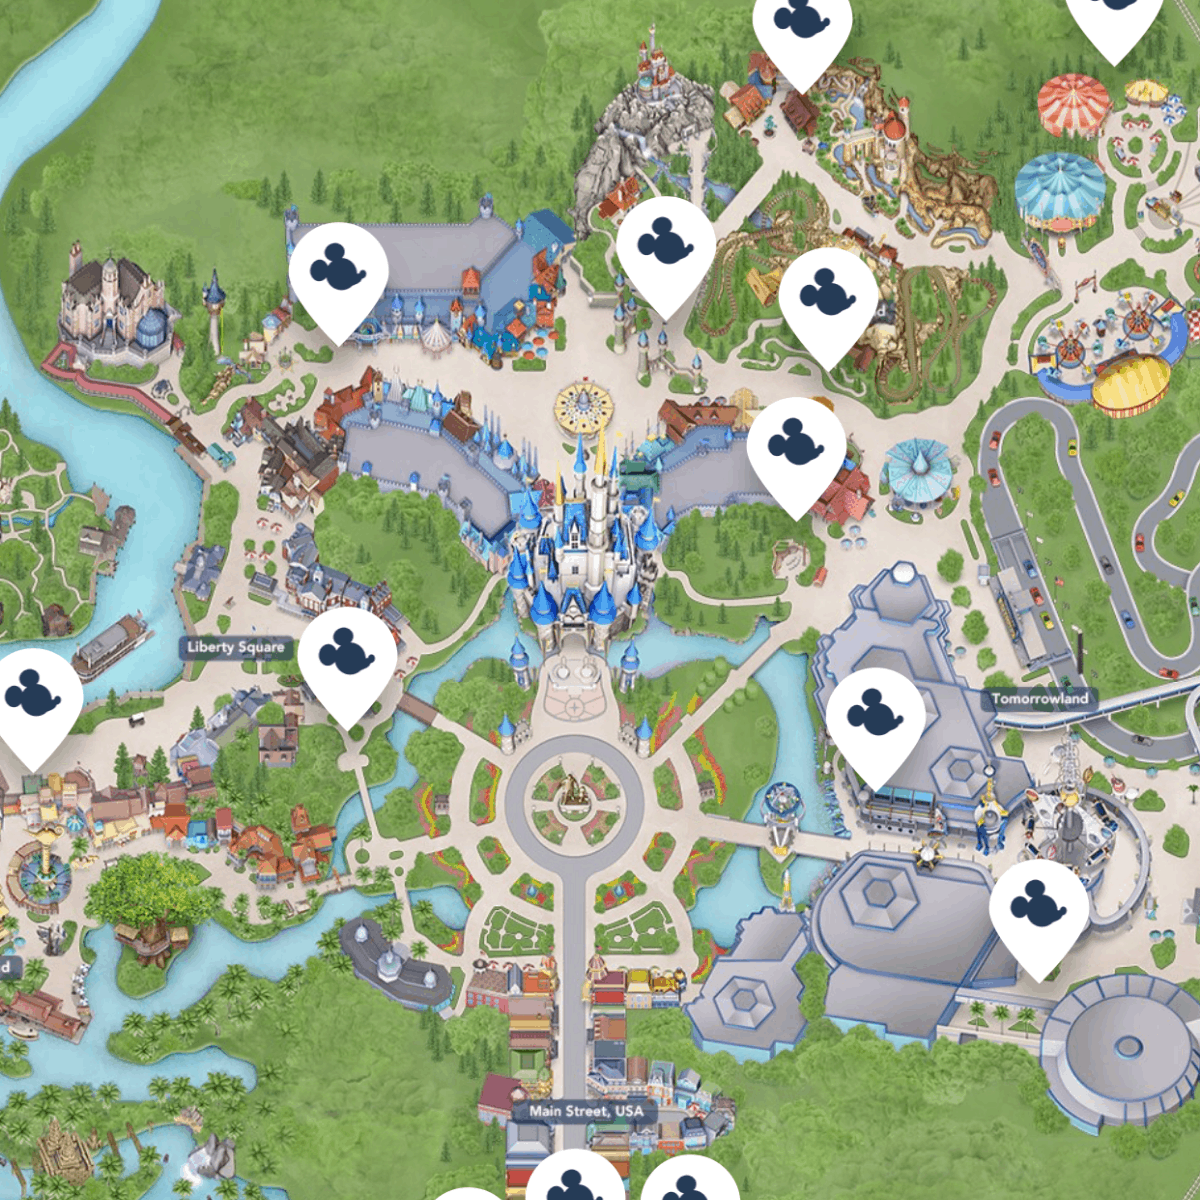 Using My Disney Experience to find Characters at Disney World